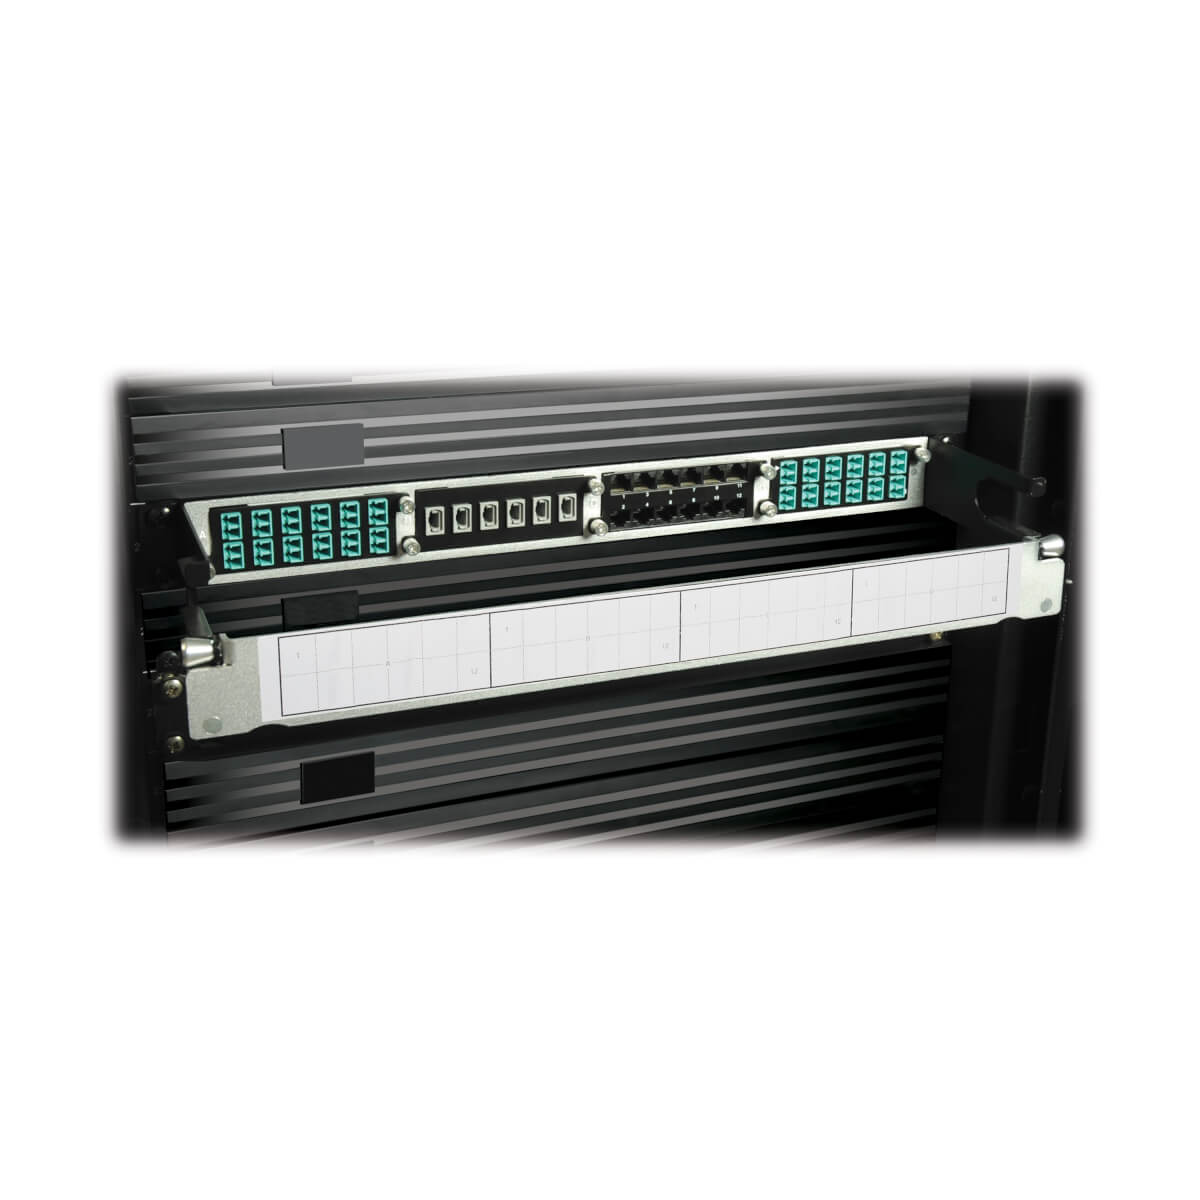 Up to 4 cassettes can be used with Tripp Lite's N484-01U High Density Copper Enclosure Panel.